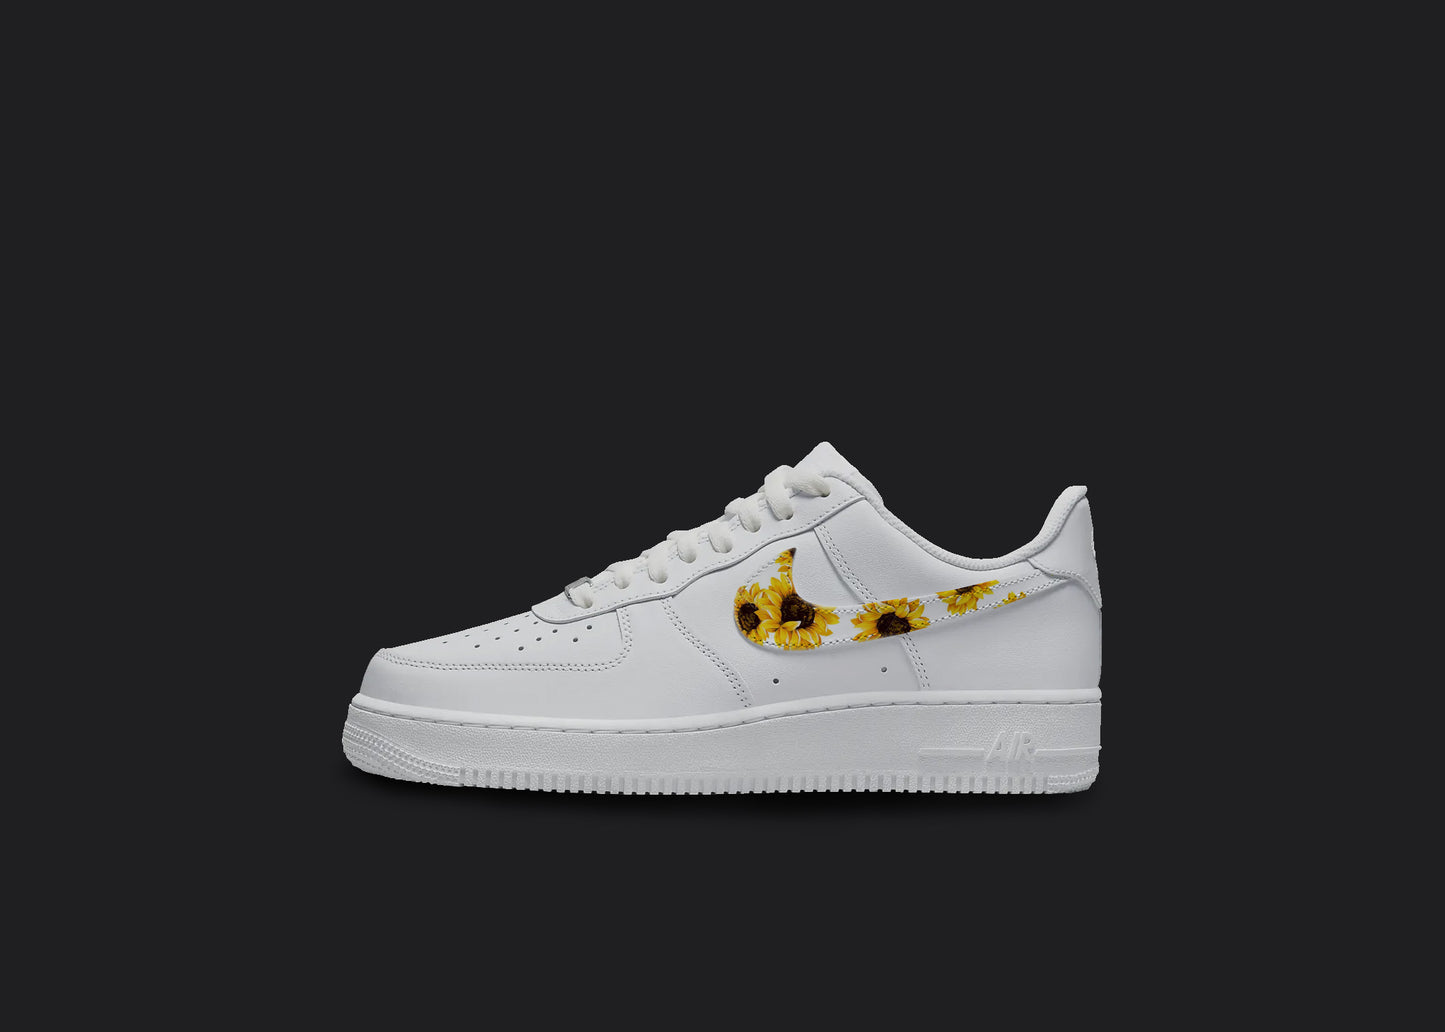 The image is featuring a Custom Nike Air force 1 sneakers on a blank black background. The white nike sneaker has a yellow sunflower swoosh. 